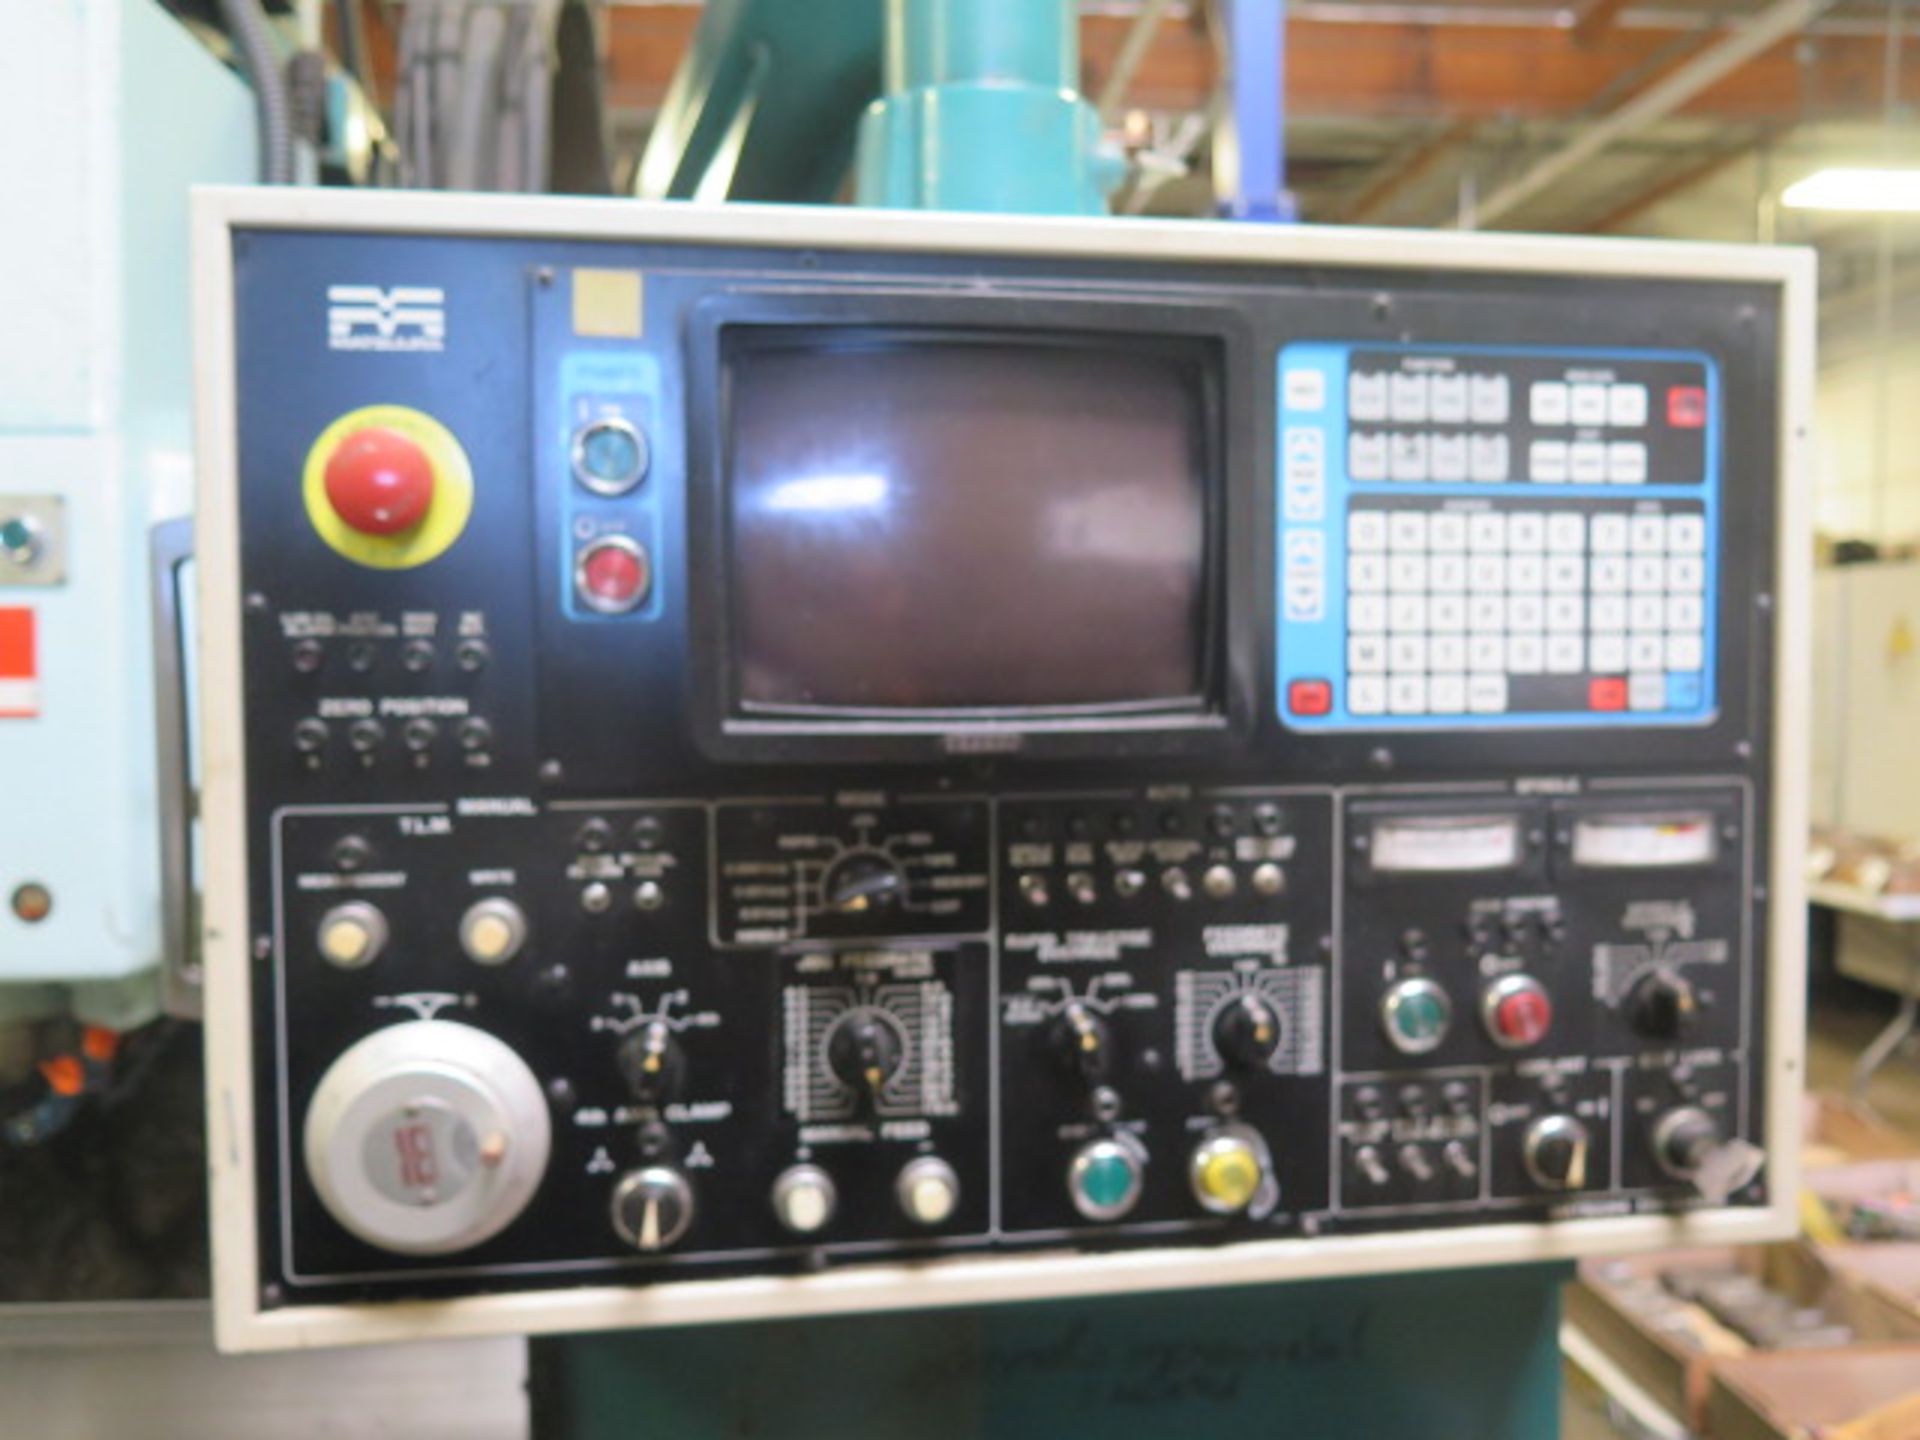 Matsuura MC-760V CNC VMC s/n 85054941 w/ Yasnac MX2 Controls, 30-Station, SOLD AS IS - Image 9 of 11